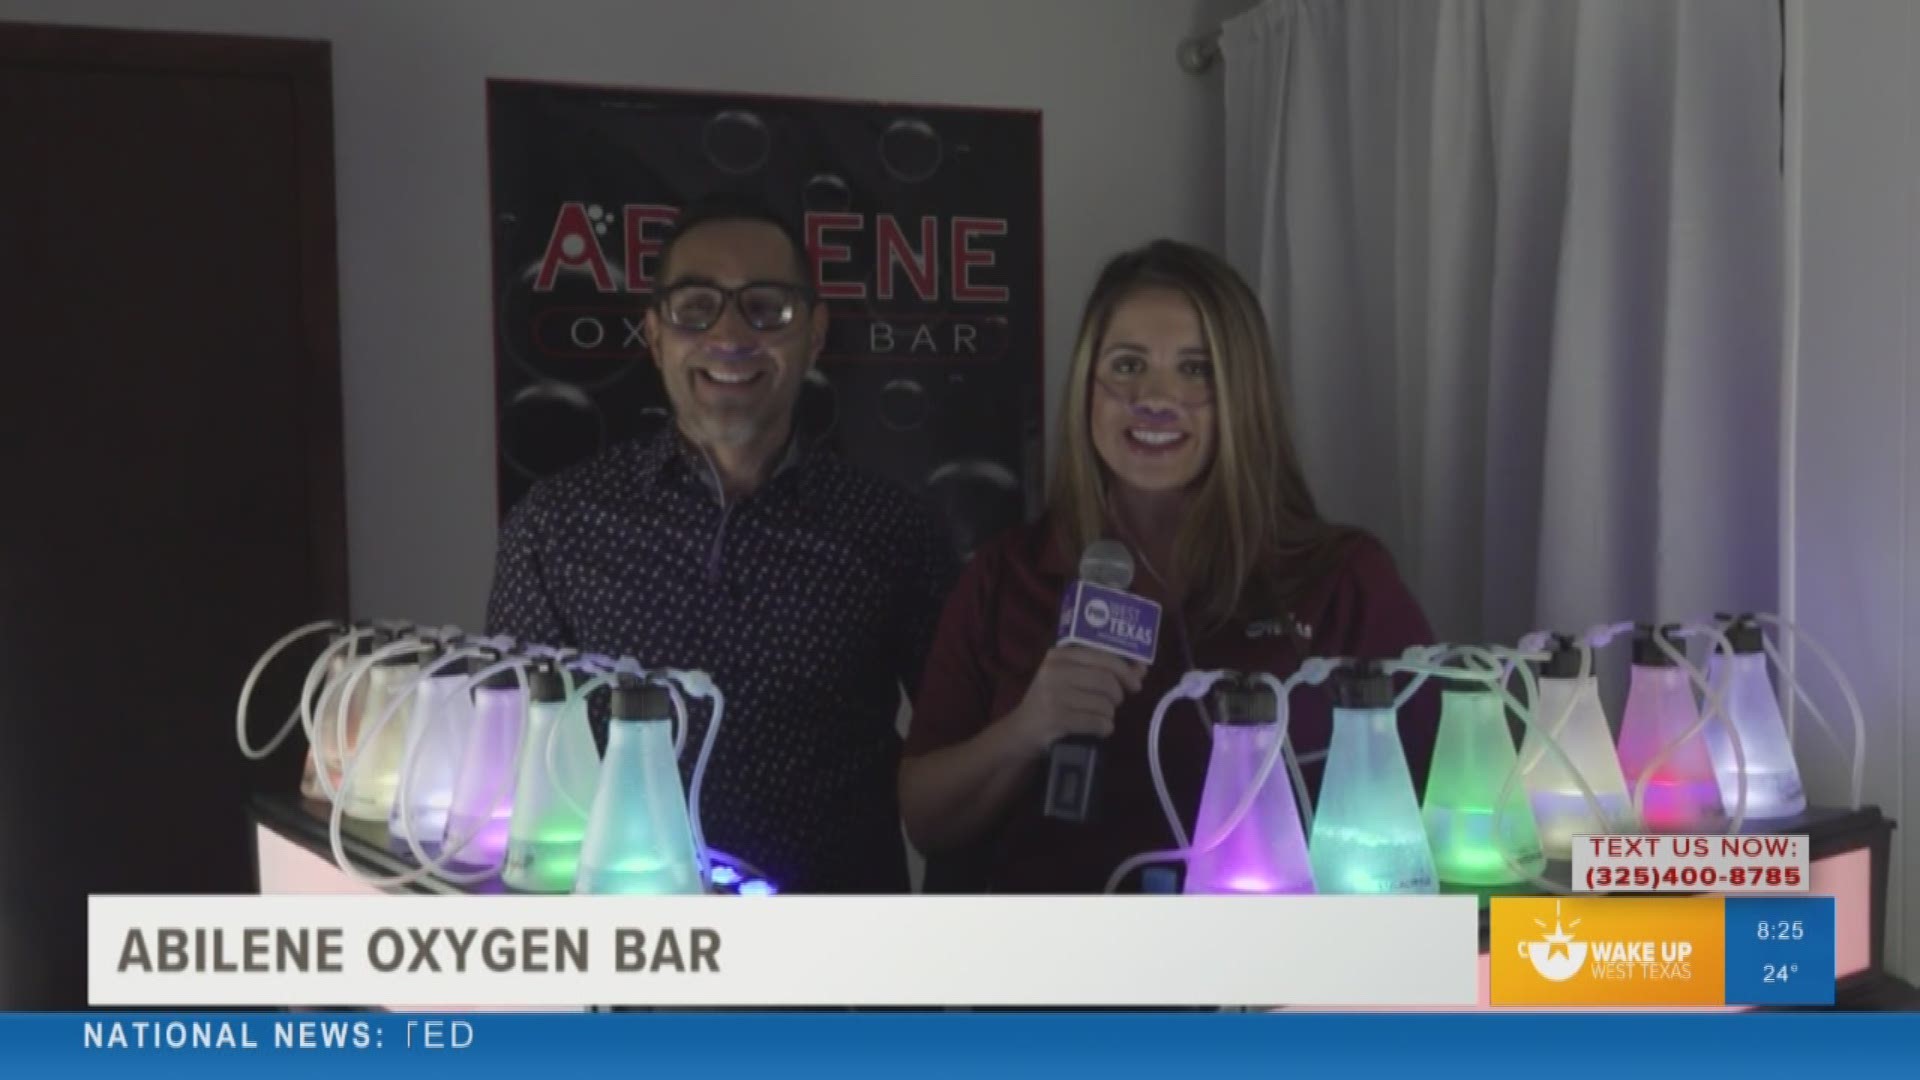 Our Lexis Greene tries out the Oxygen bar.